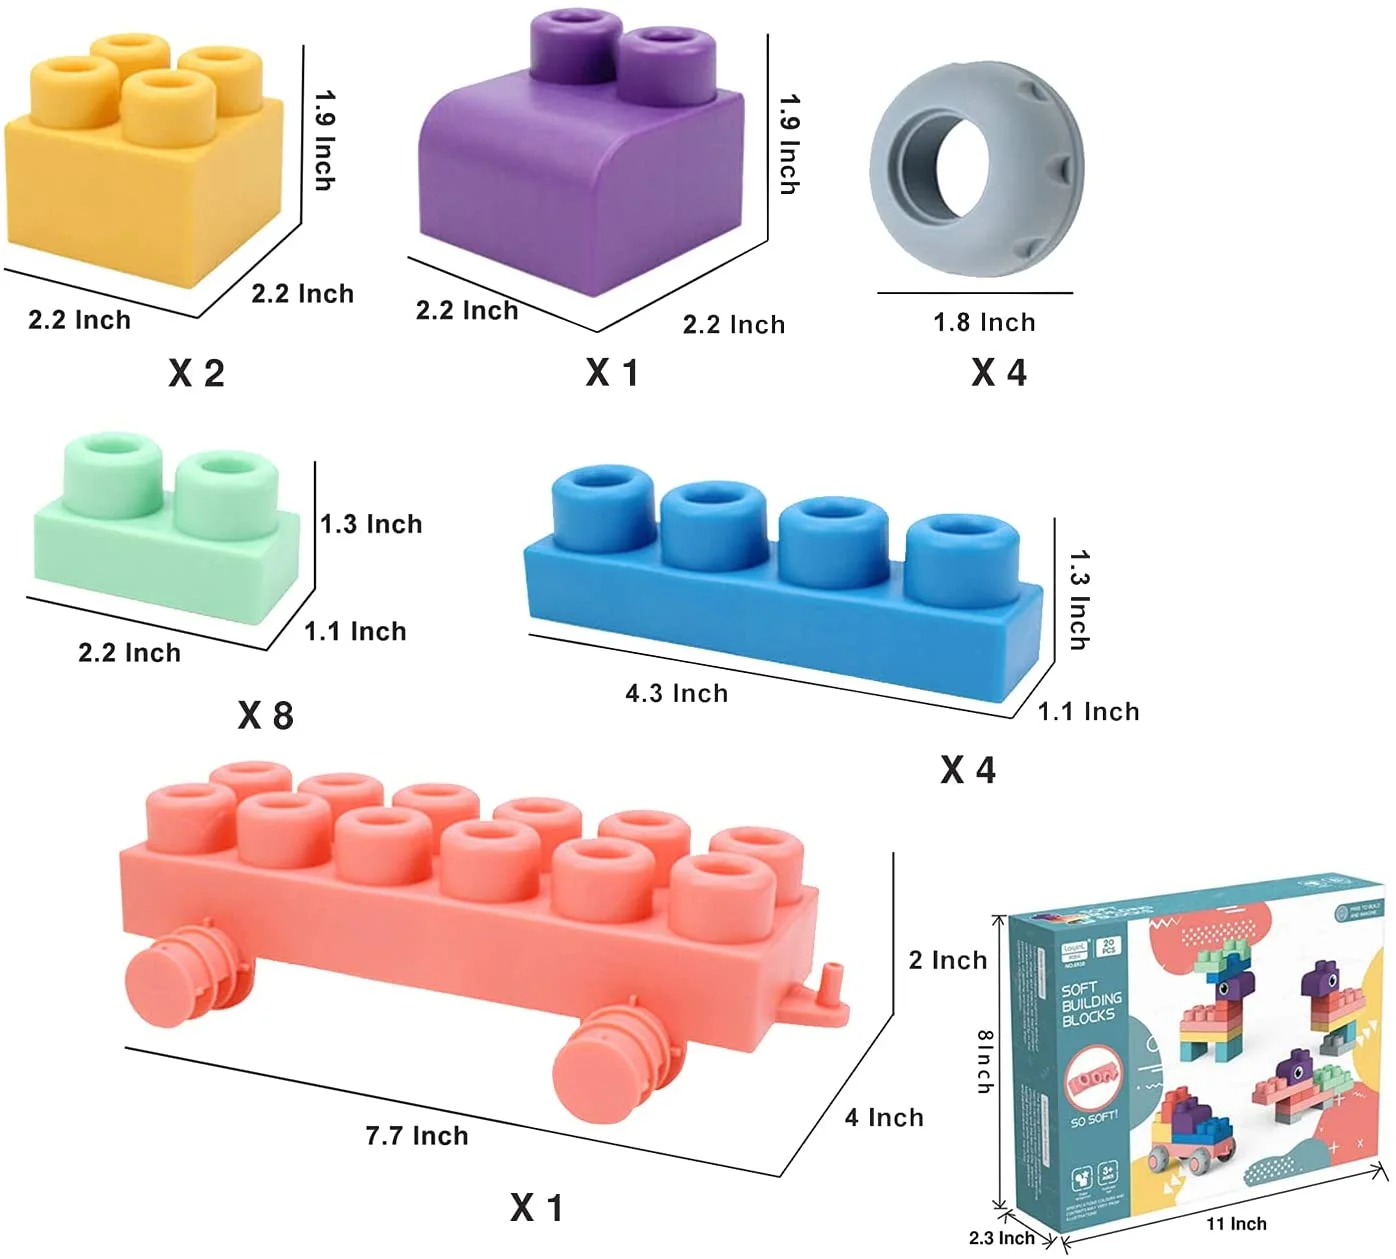 Newest Soft Building Blocks Set for Toddler Baby Ages 6 Month Old and Up Safe Playing Learning Stacking Block Toys